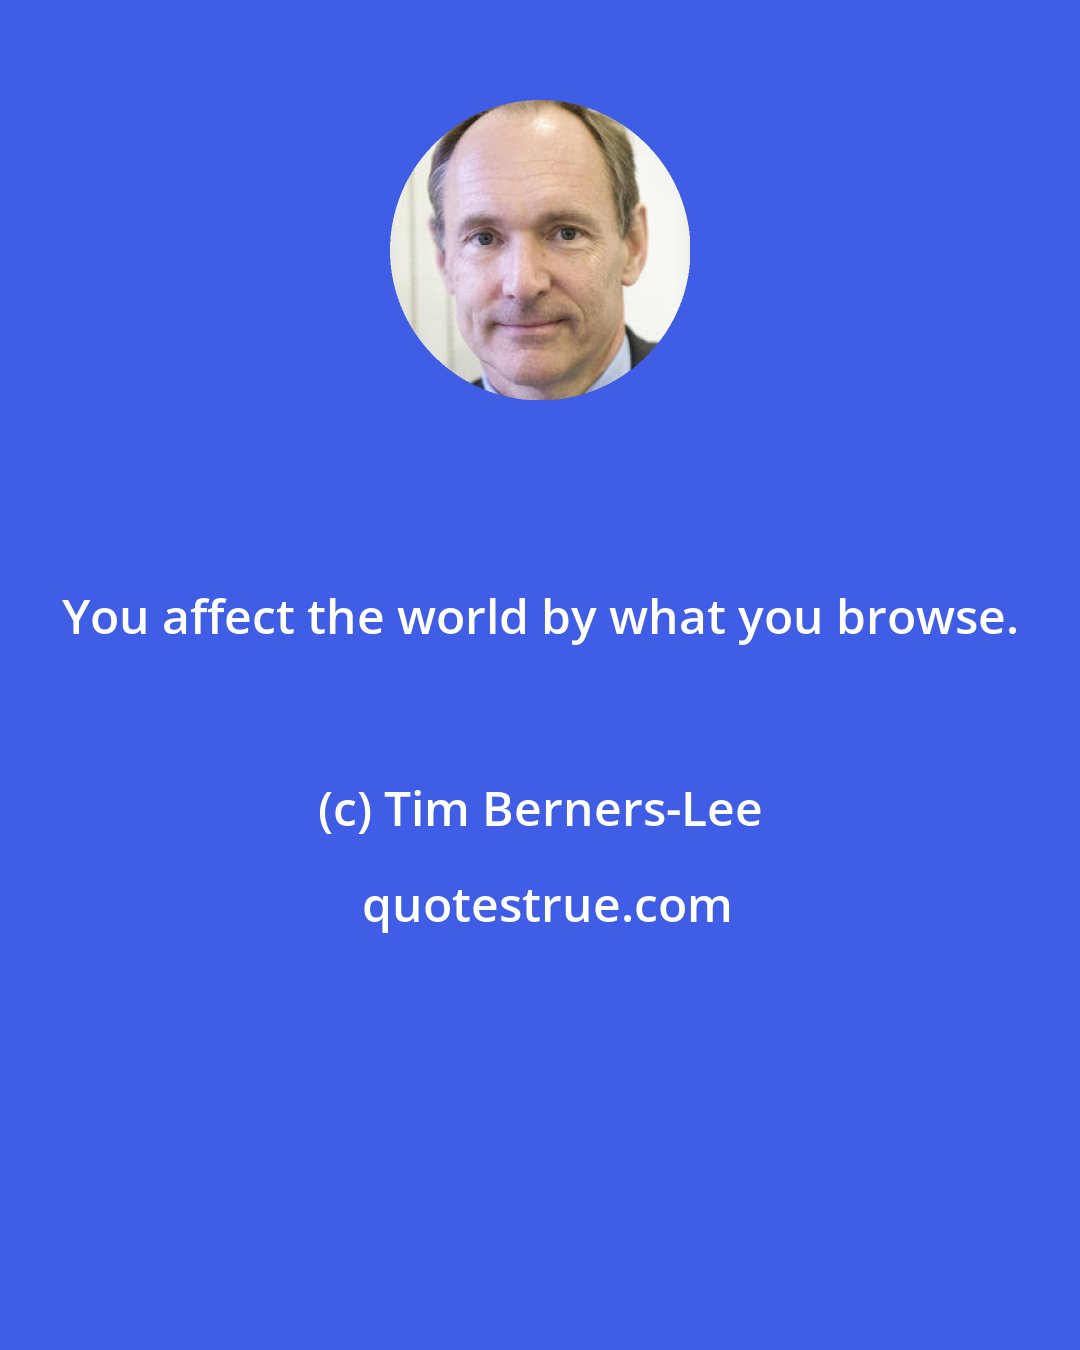 Tim Berners-Lee: You affect the world by what you browse.